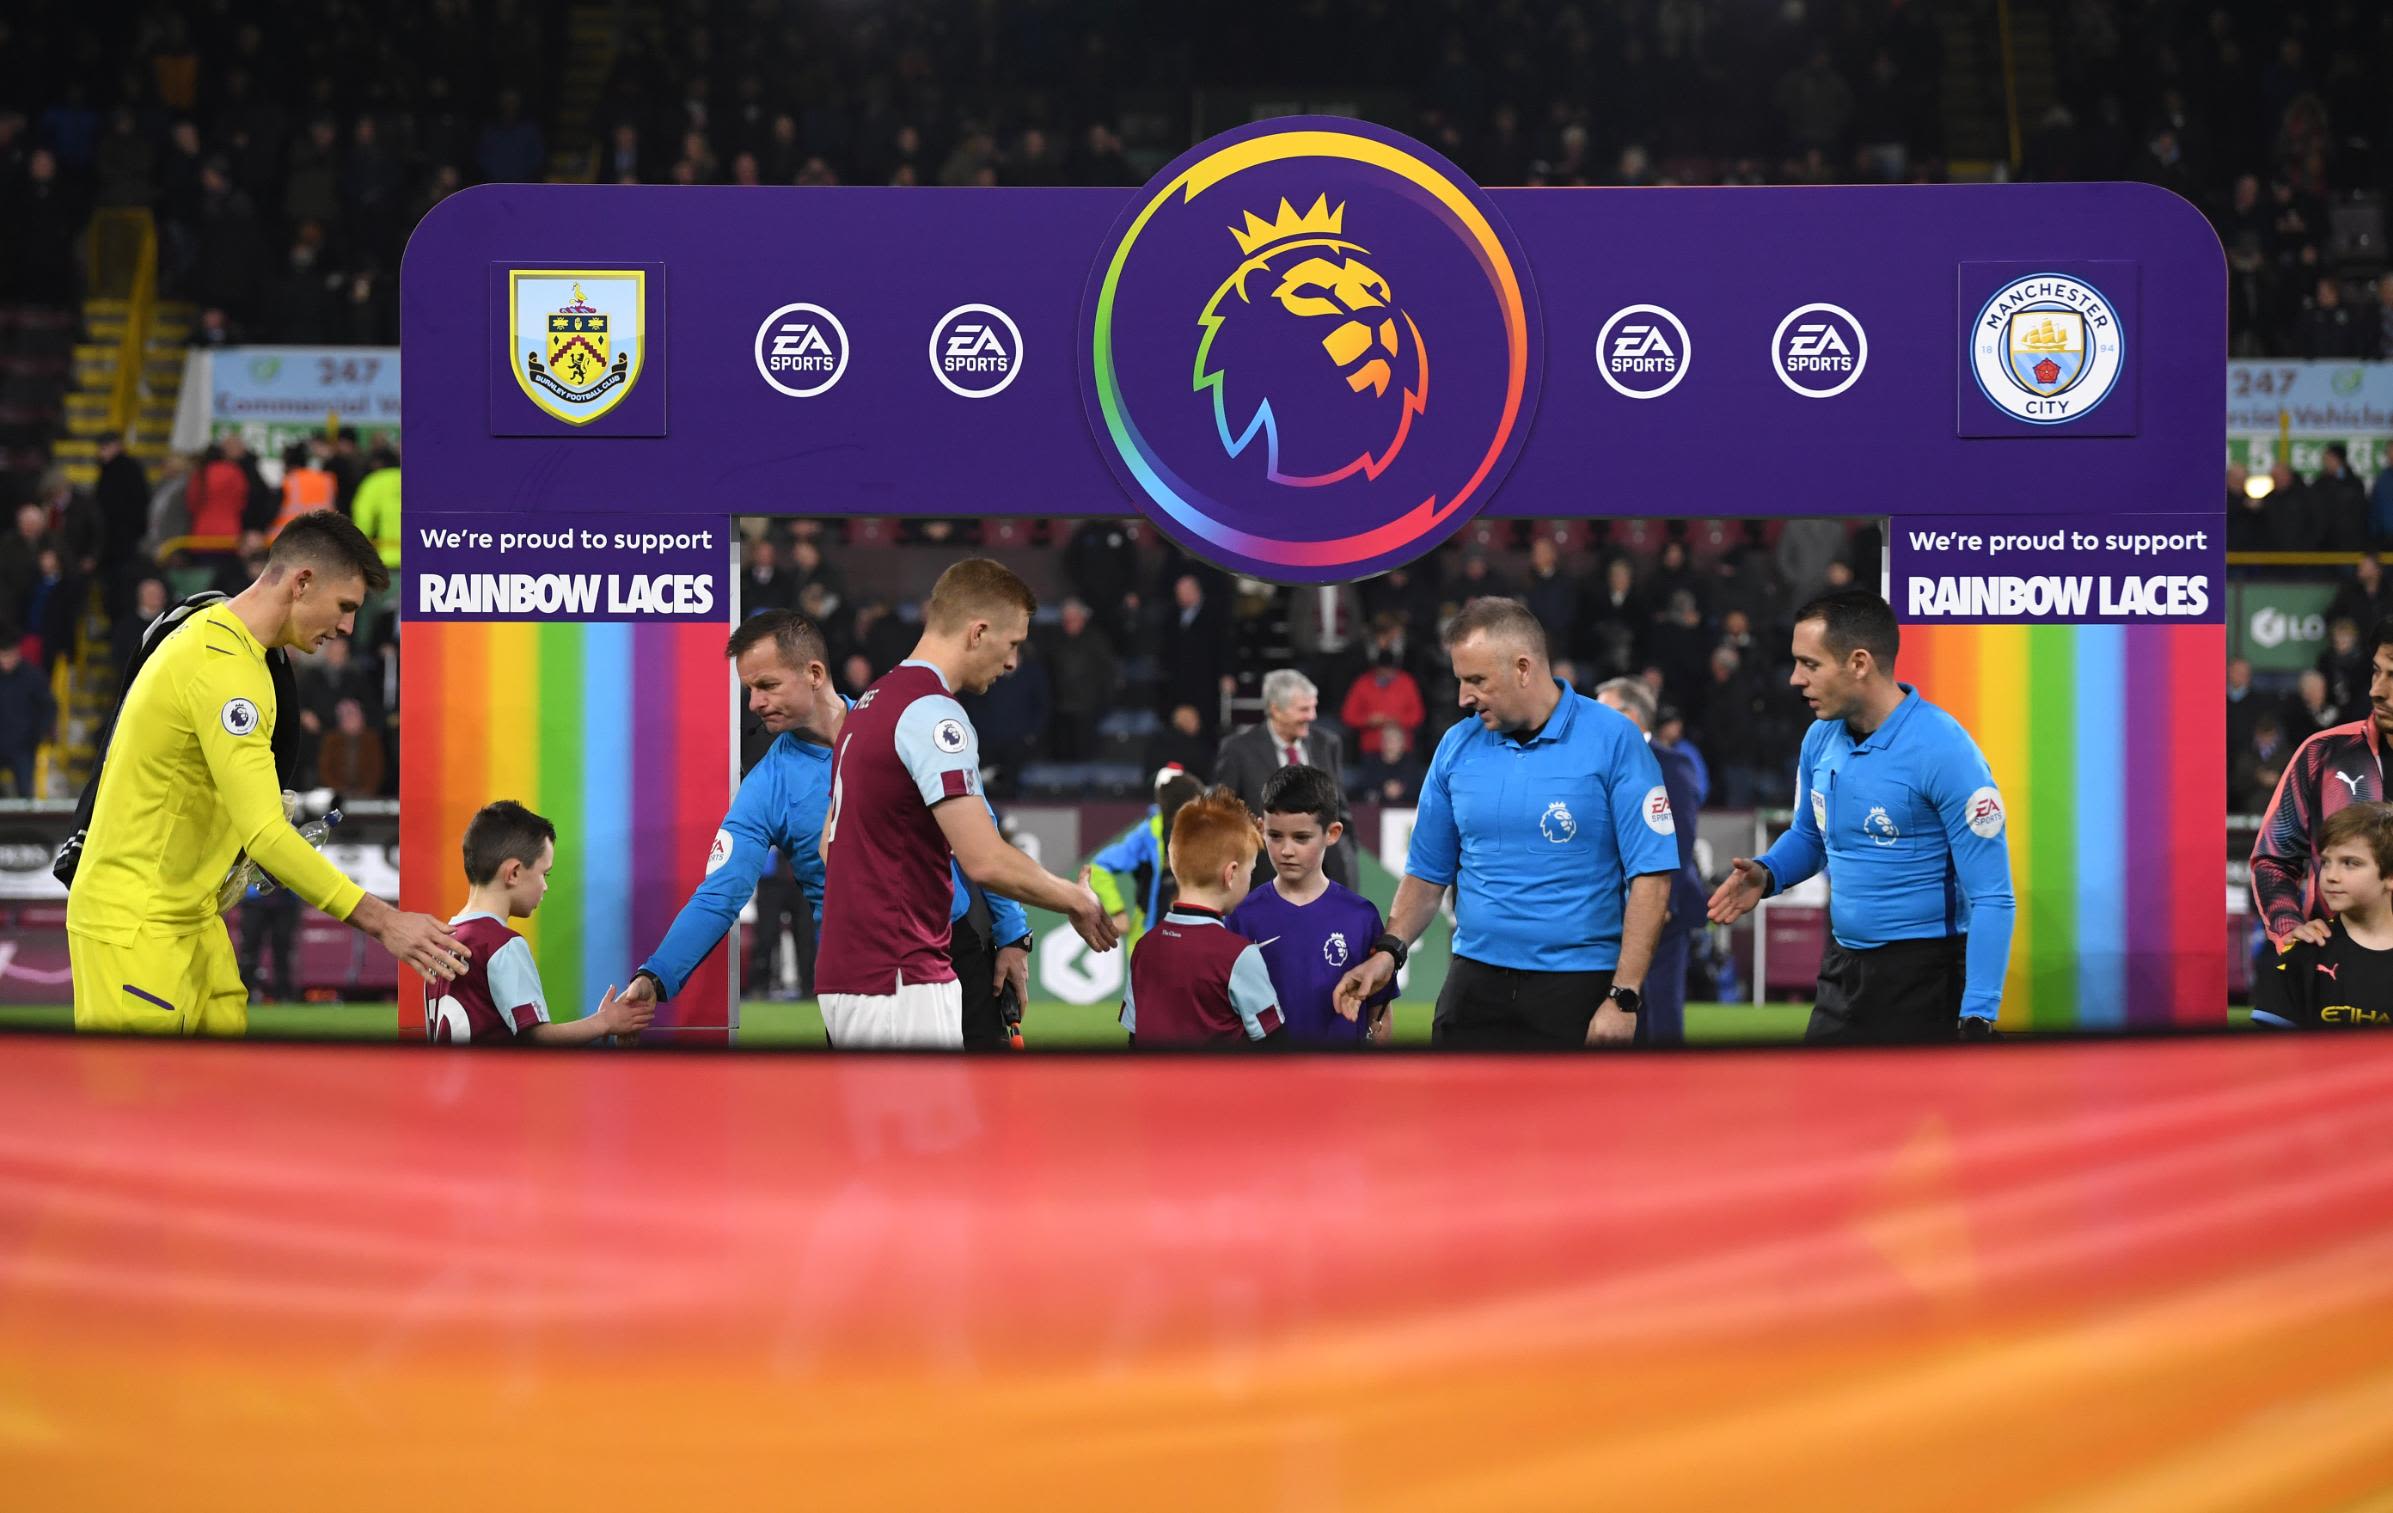 World's first: British football club goes 'full rainbow' - Outsports